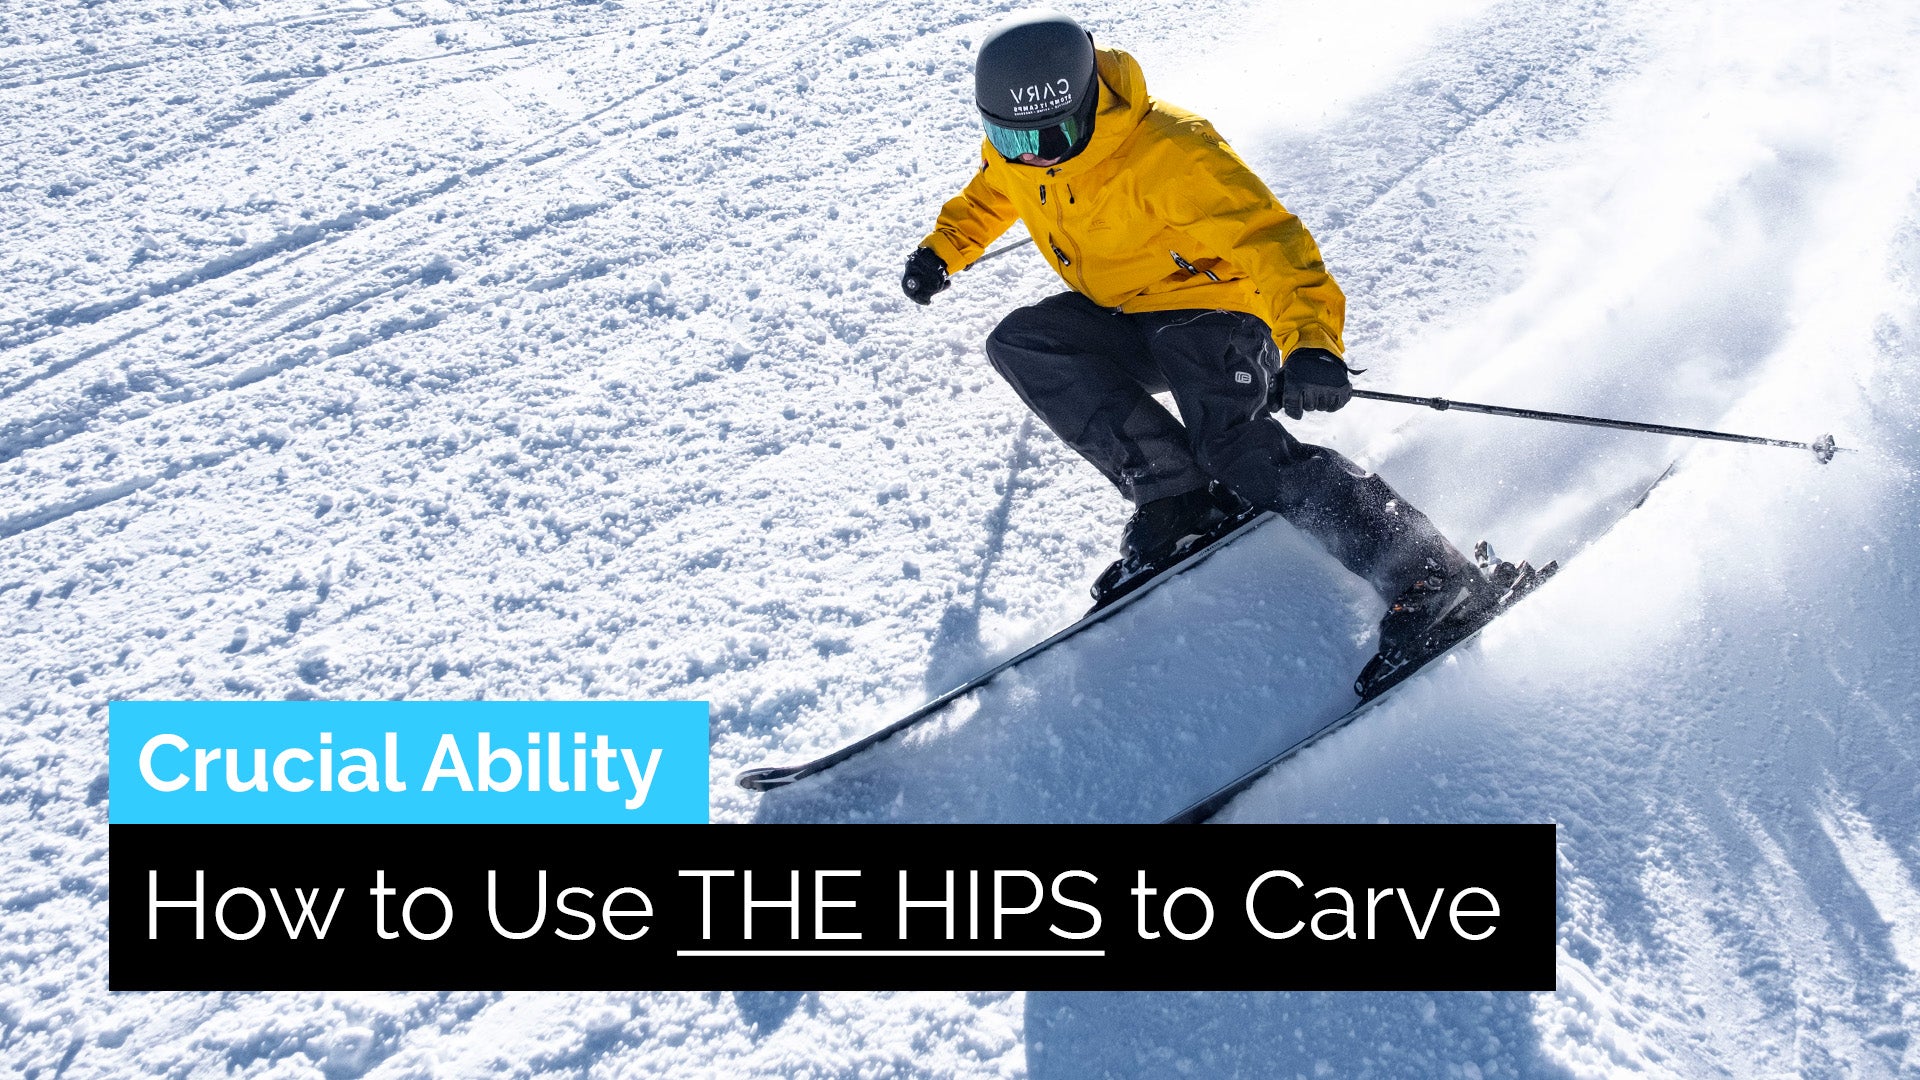 How to Use the Hips to Carve on Skis | The Crucial Ability